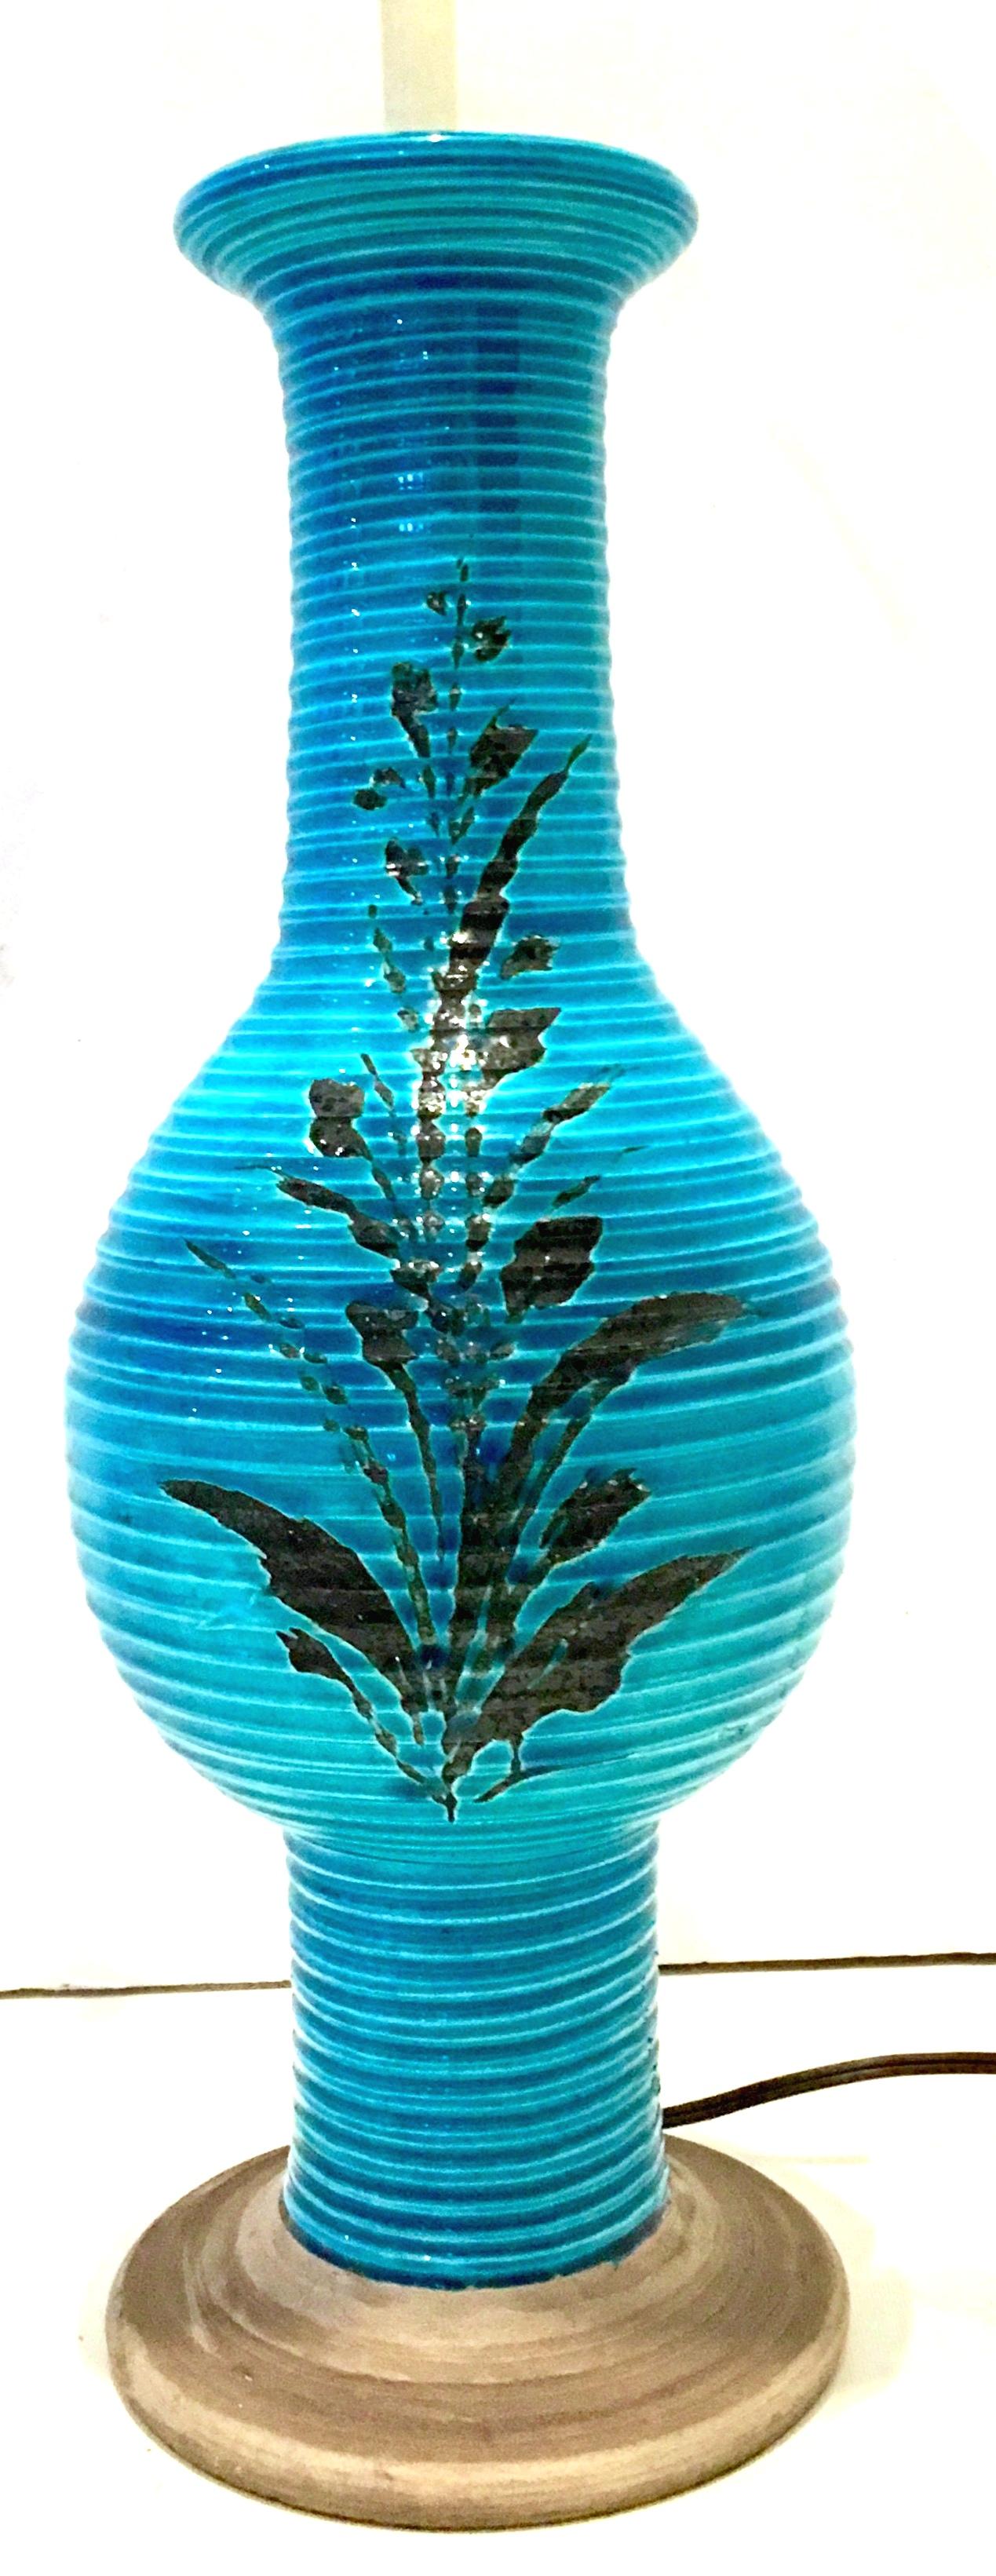 Hand-Painted 1960s Italian Cerulean Blue & Black Ceramic Glaze Pottery Lamp by, Bitossi For Sale